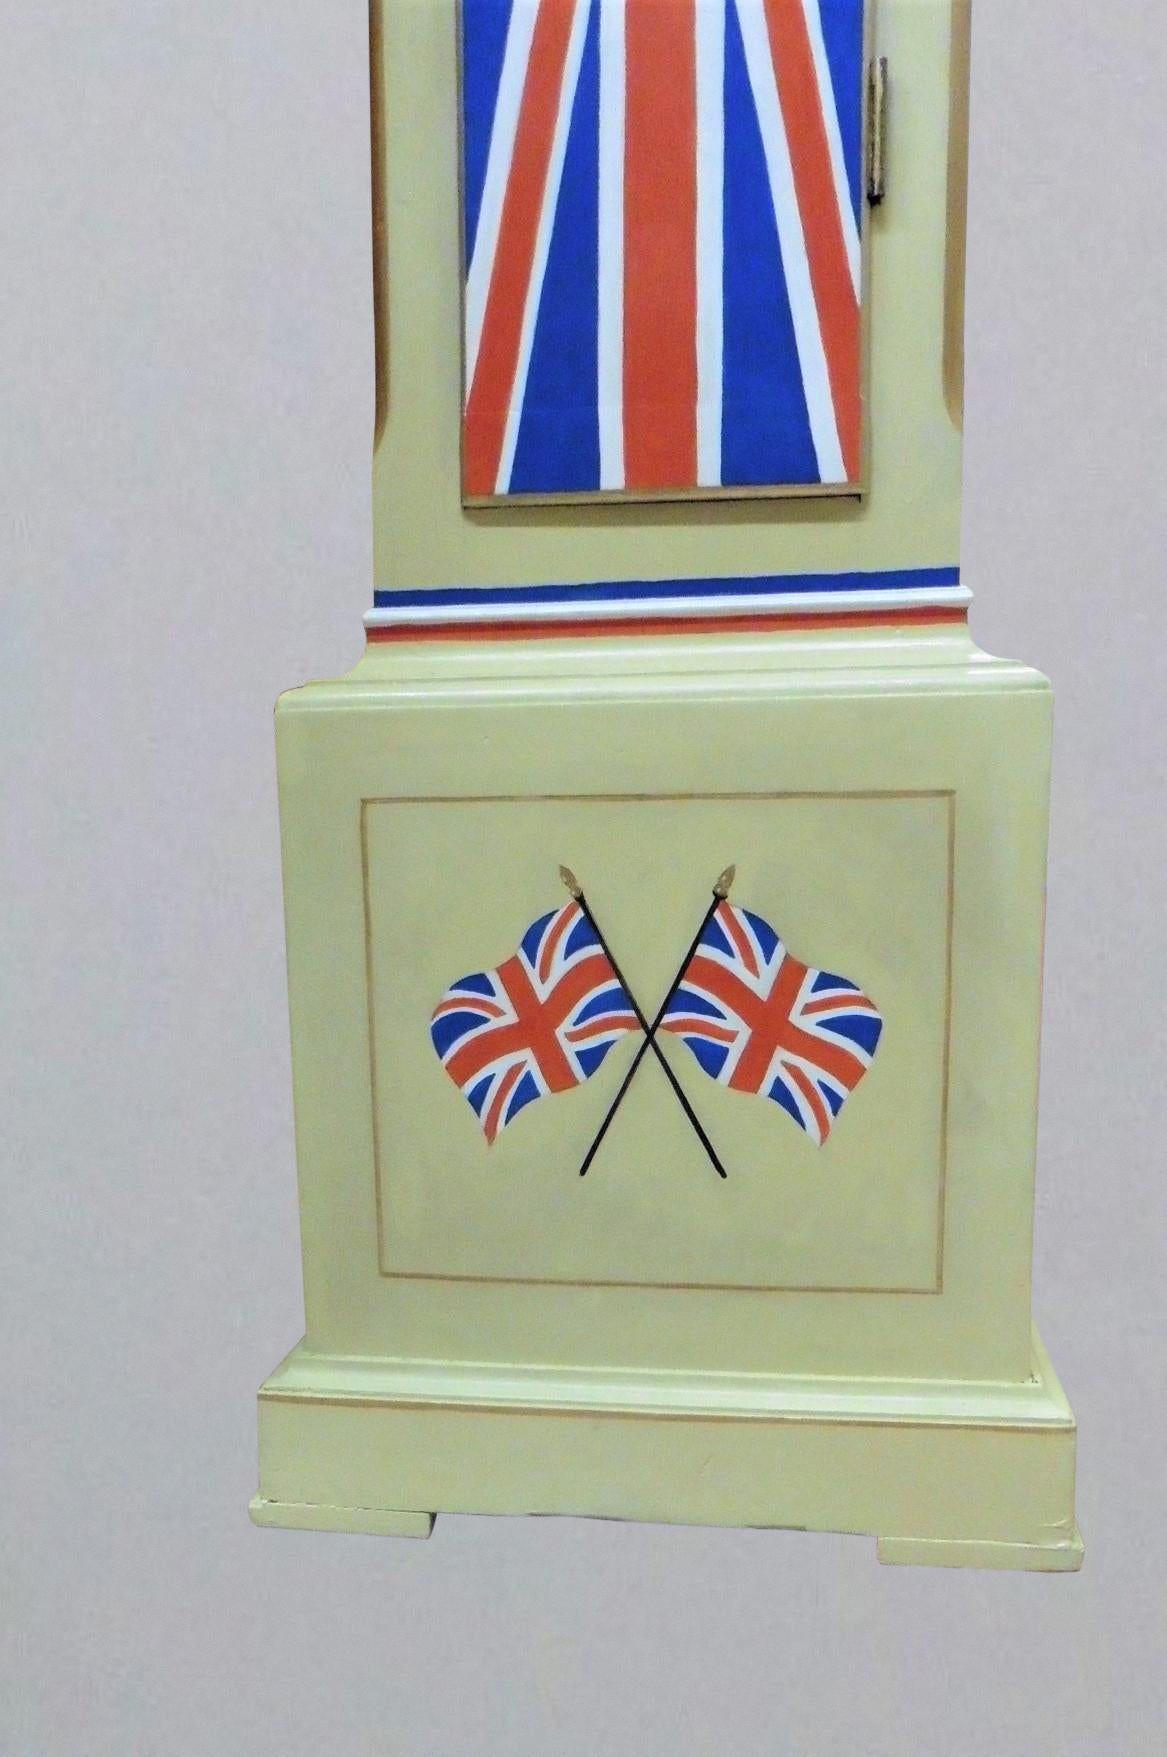 Rule Britannia Grandmother clock c,1930

Grandmother clock standing on a raised, moulded plinth resting on four pad feet. Decorated on a cream ground with the Union Jack to the trunk door with gilded canted corners. Twin Union Jack flags to the